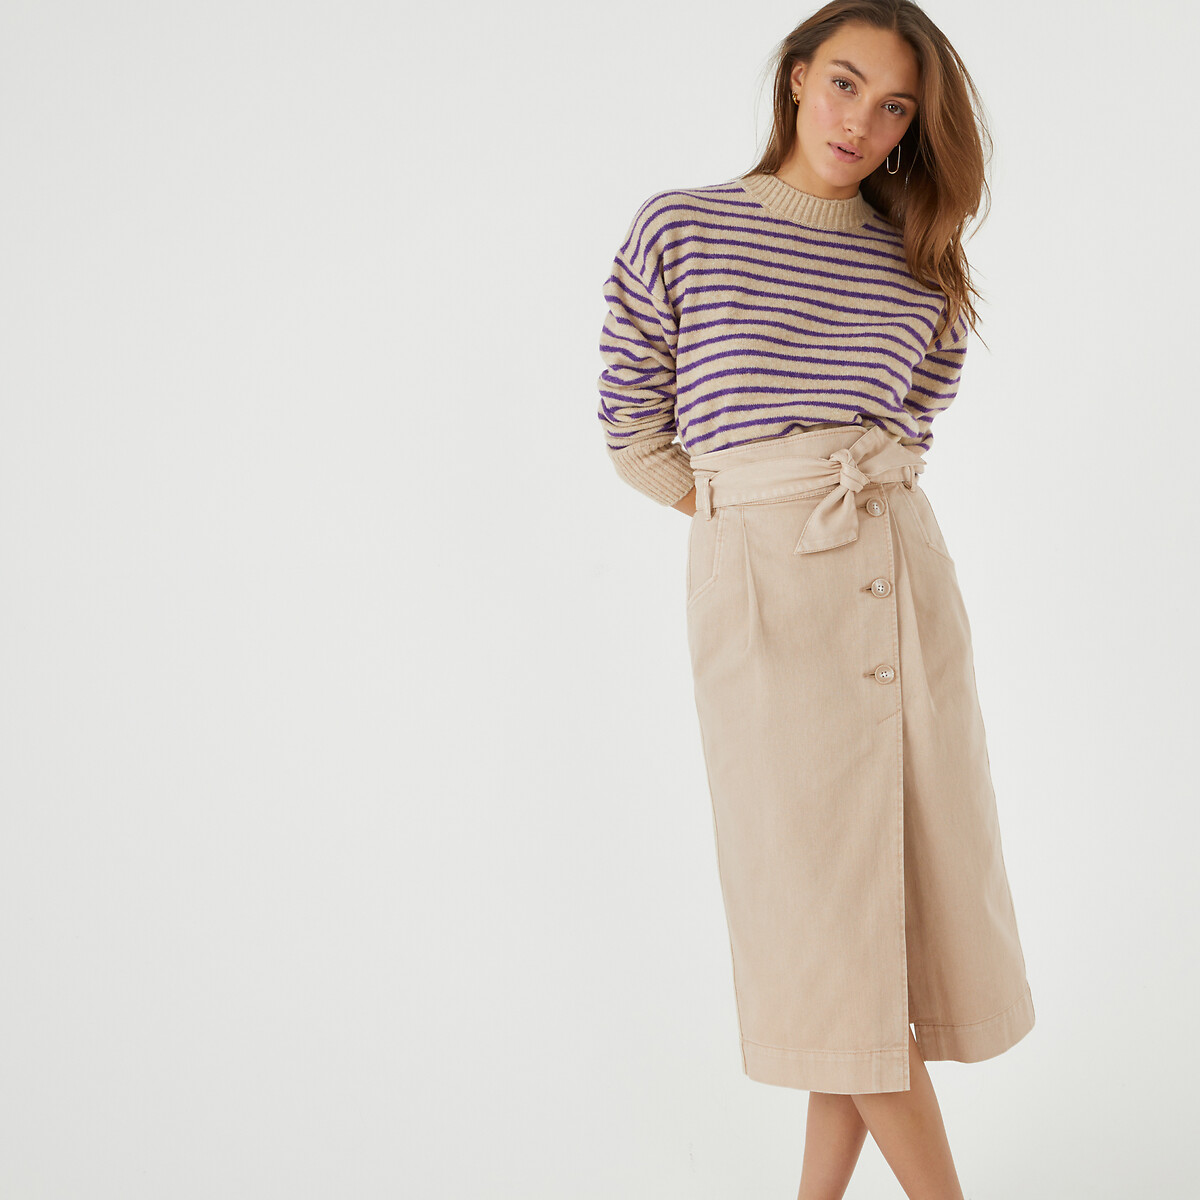 Cotton Buttoned Wrapover Skirt with Tie Waist